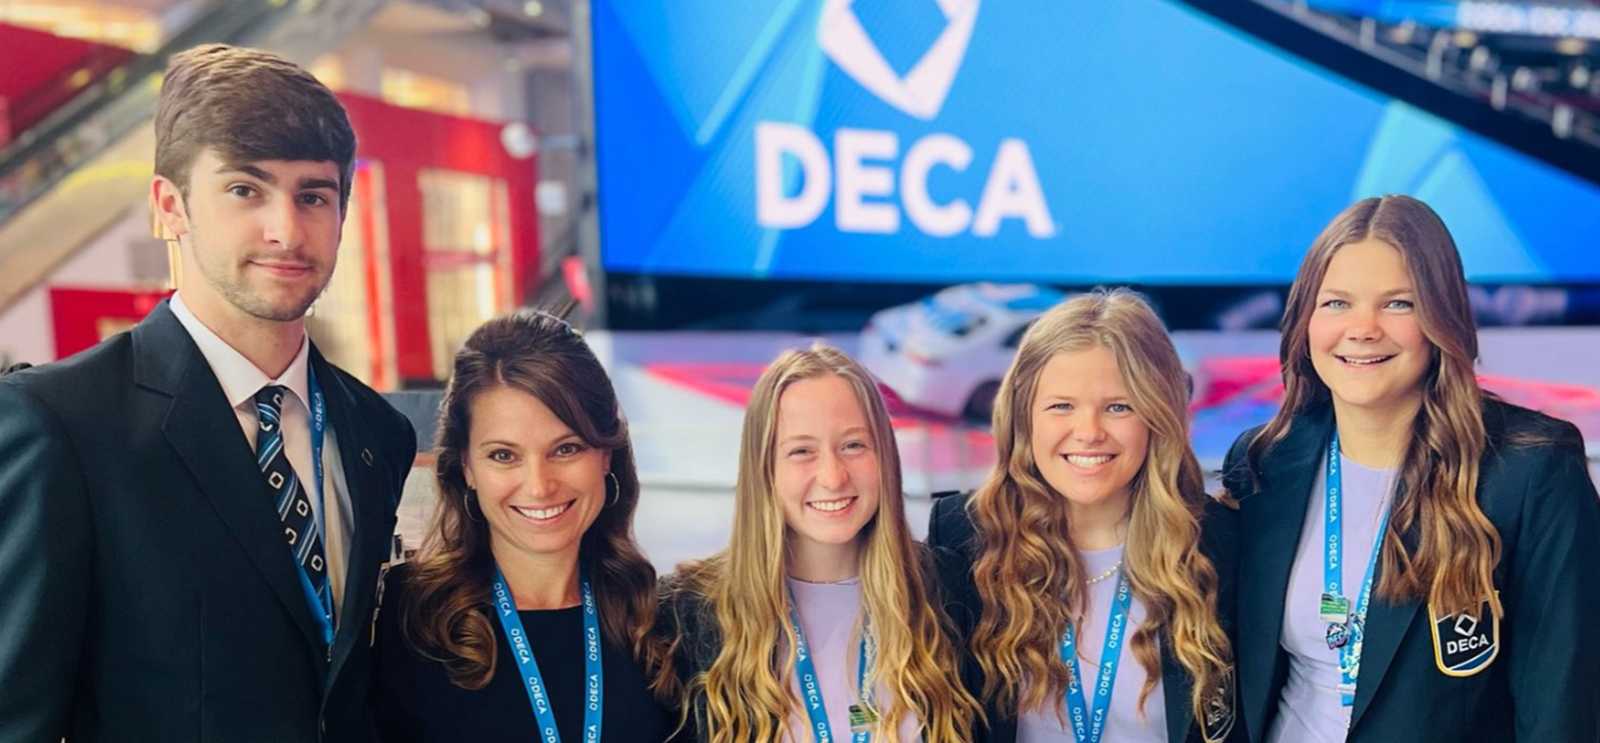 Staff with DECA Students